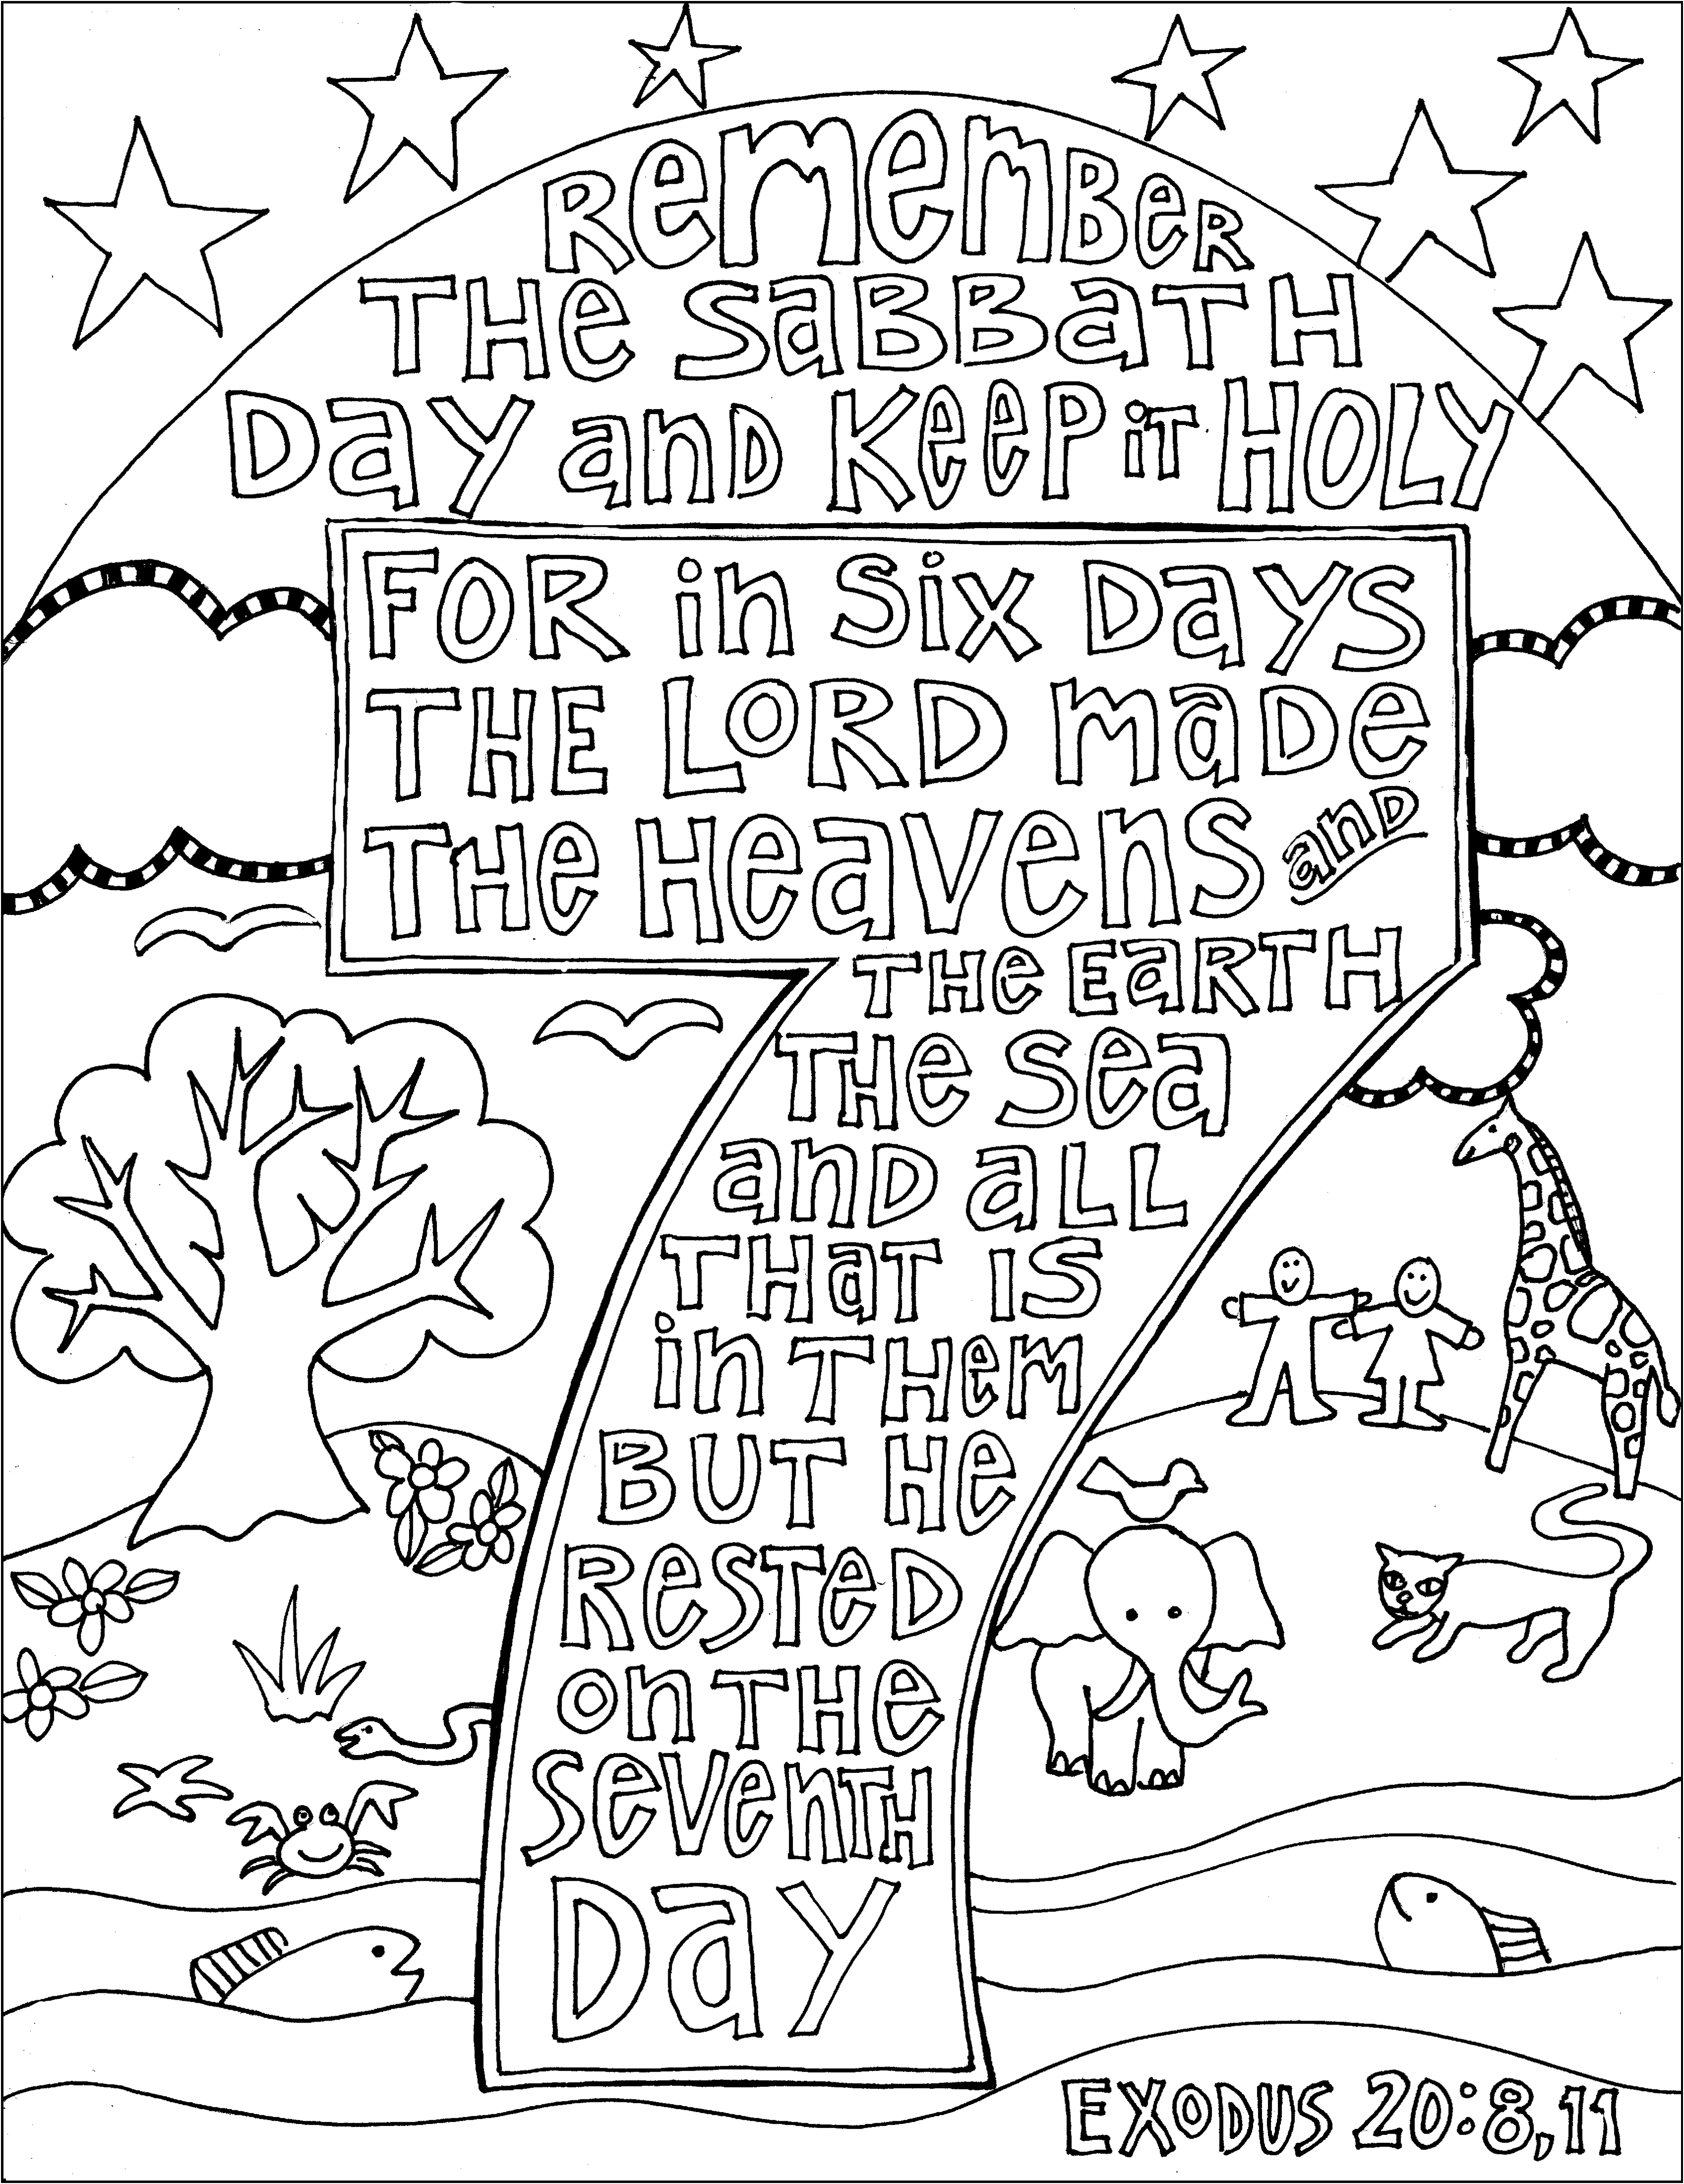 Keep The Sabbath Scripture Doodle From Victory Road